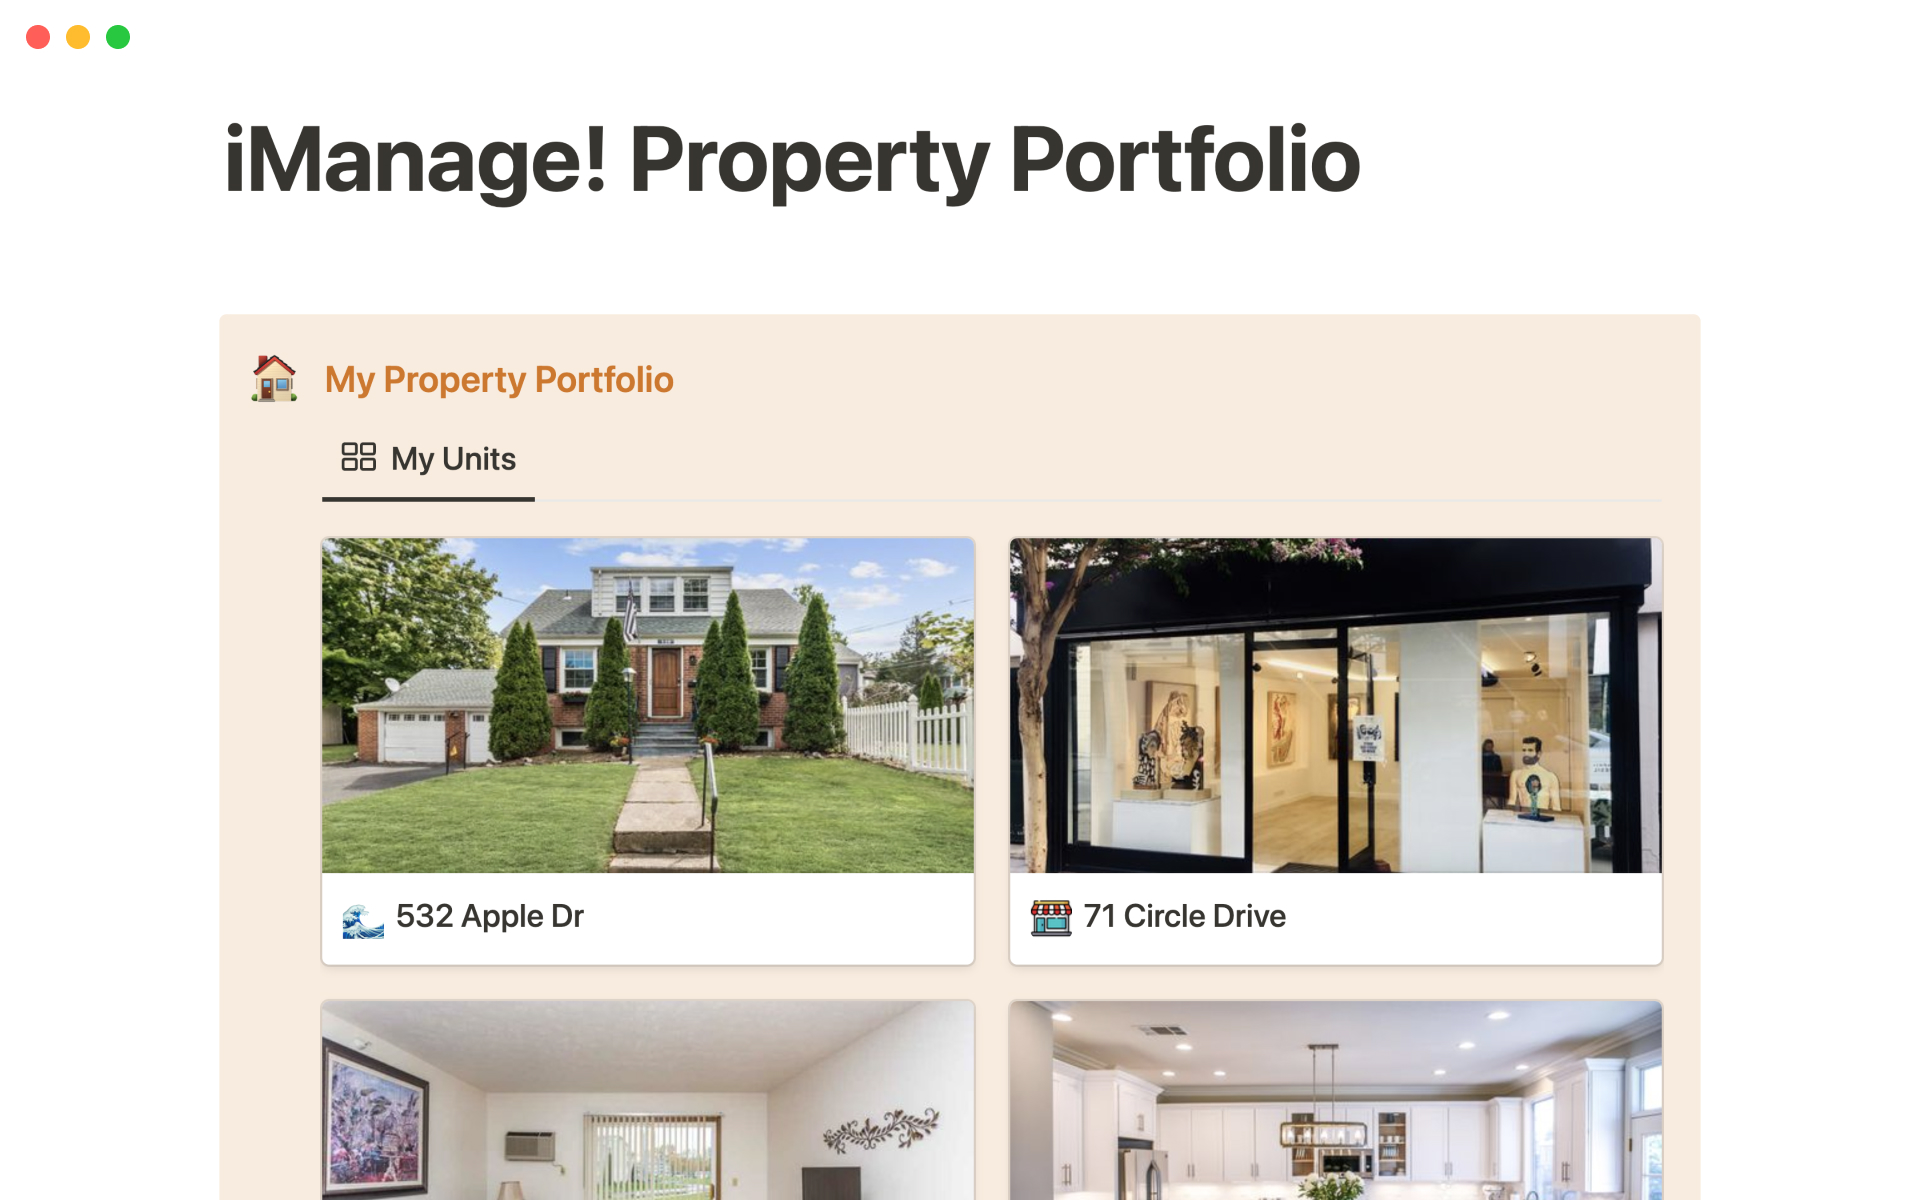 Track and manage your properties in one place. Add important information to have a clear overview of your portfolio.